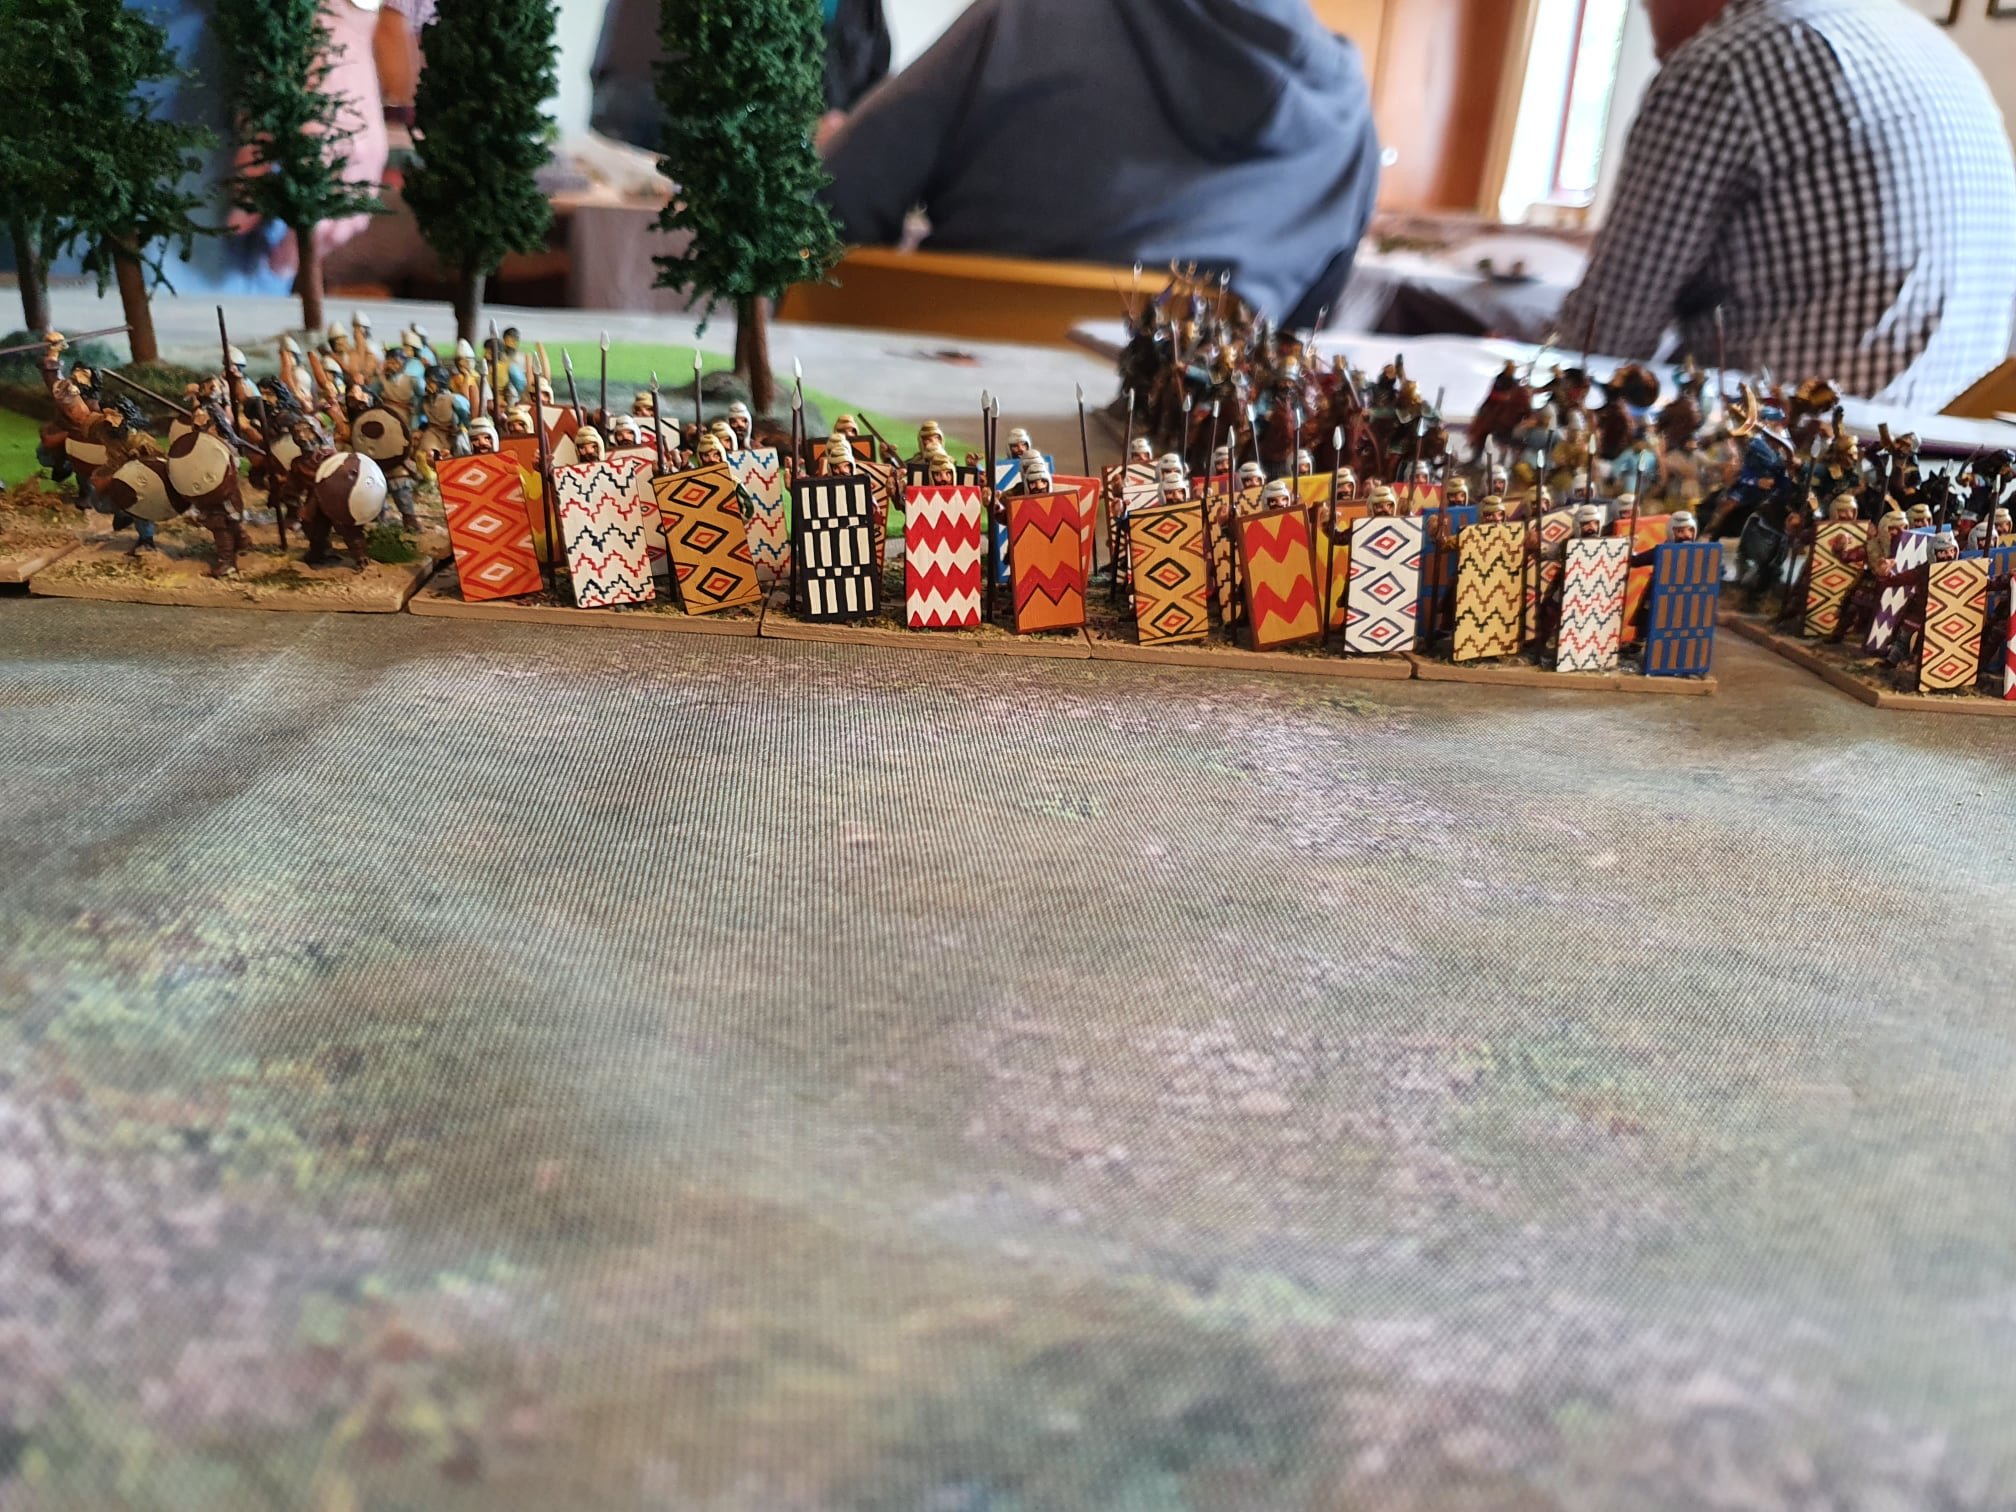  DBMM Persian immortals braced for a Greek charge 